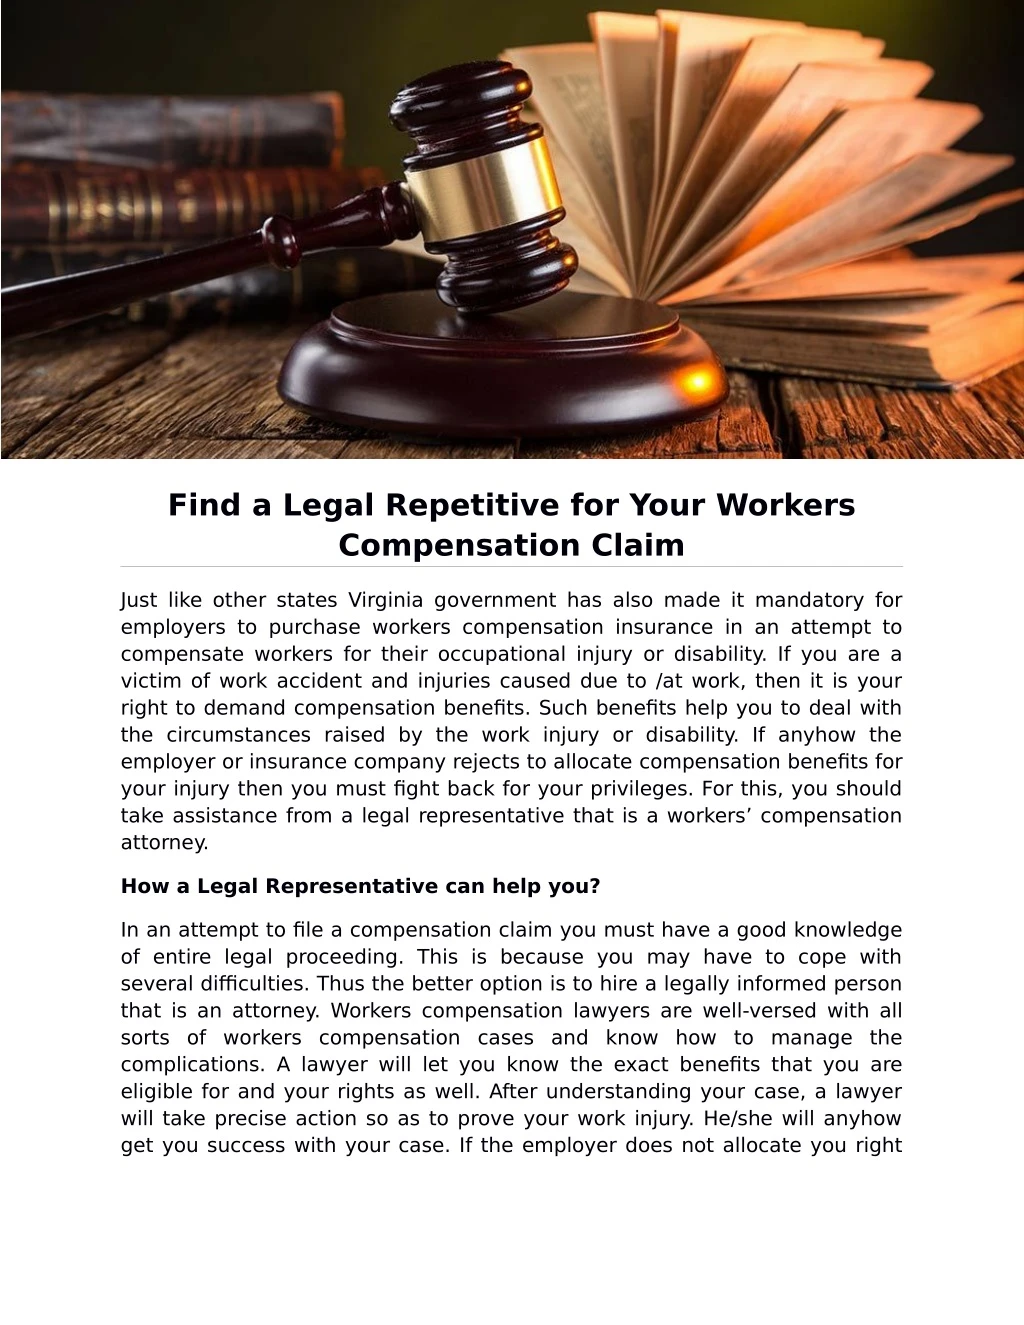 find a legal repetitive for your workers